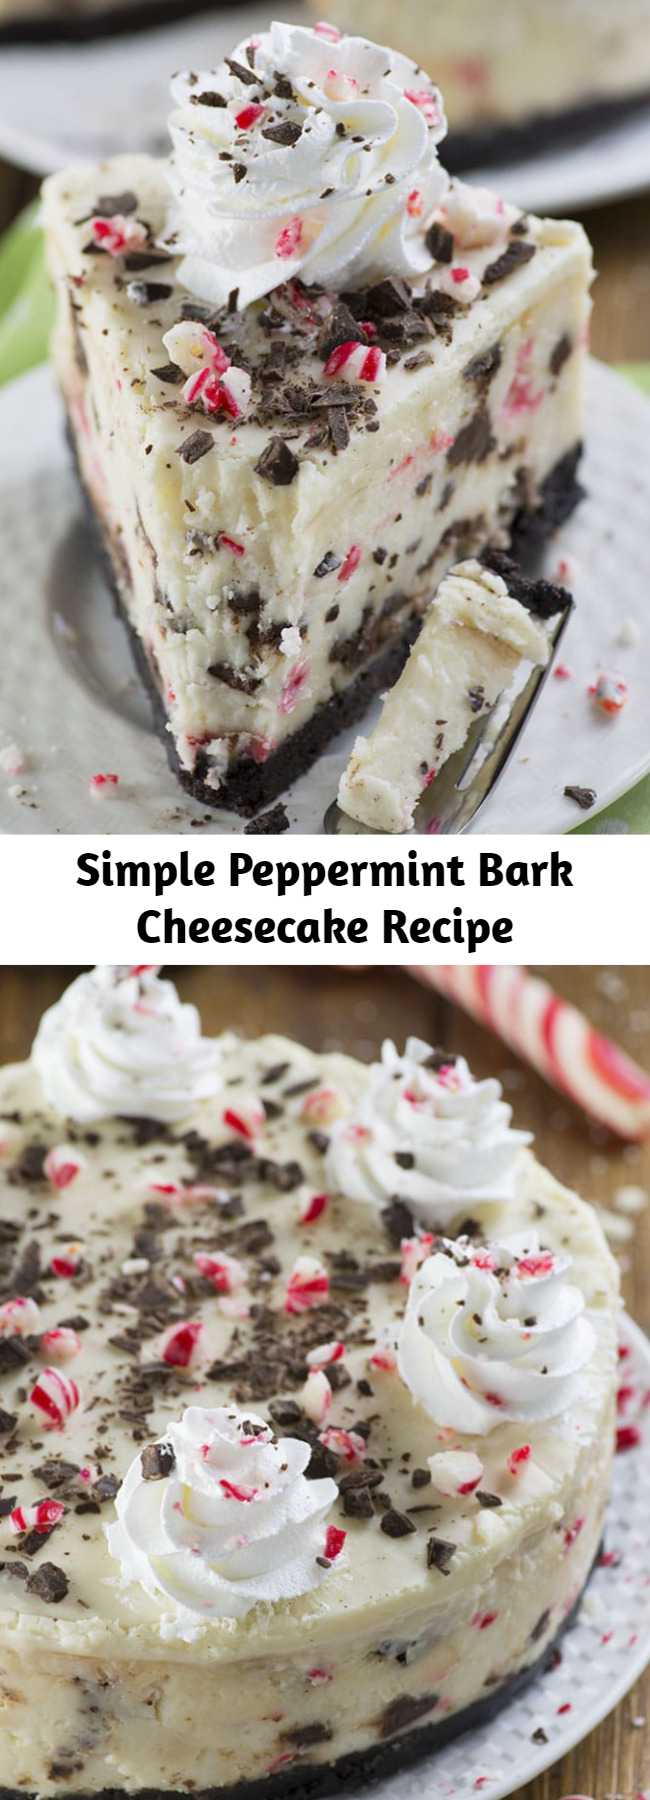 Simple Peppermint Bark Cheesecake Recipe - It has three delicious layer-Oreo crust, creamy cheesecake filling loaded with peppermint bark pieces and white chocolate ganache on top garnished with crushed candy canes, whipped cream and chocolate.